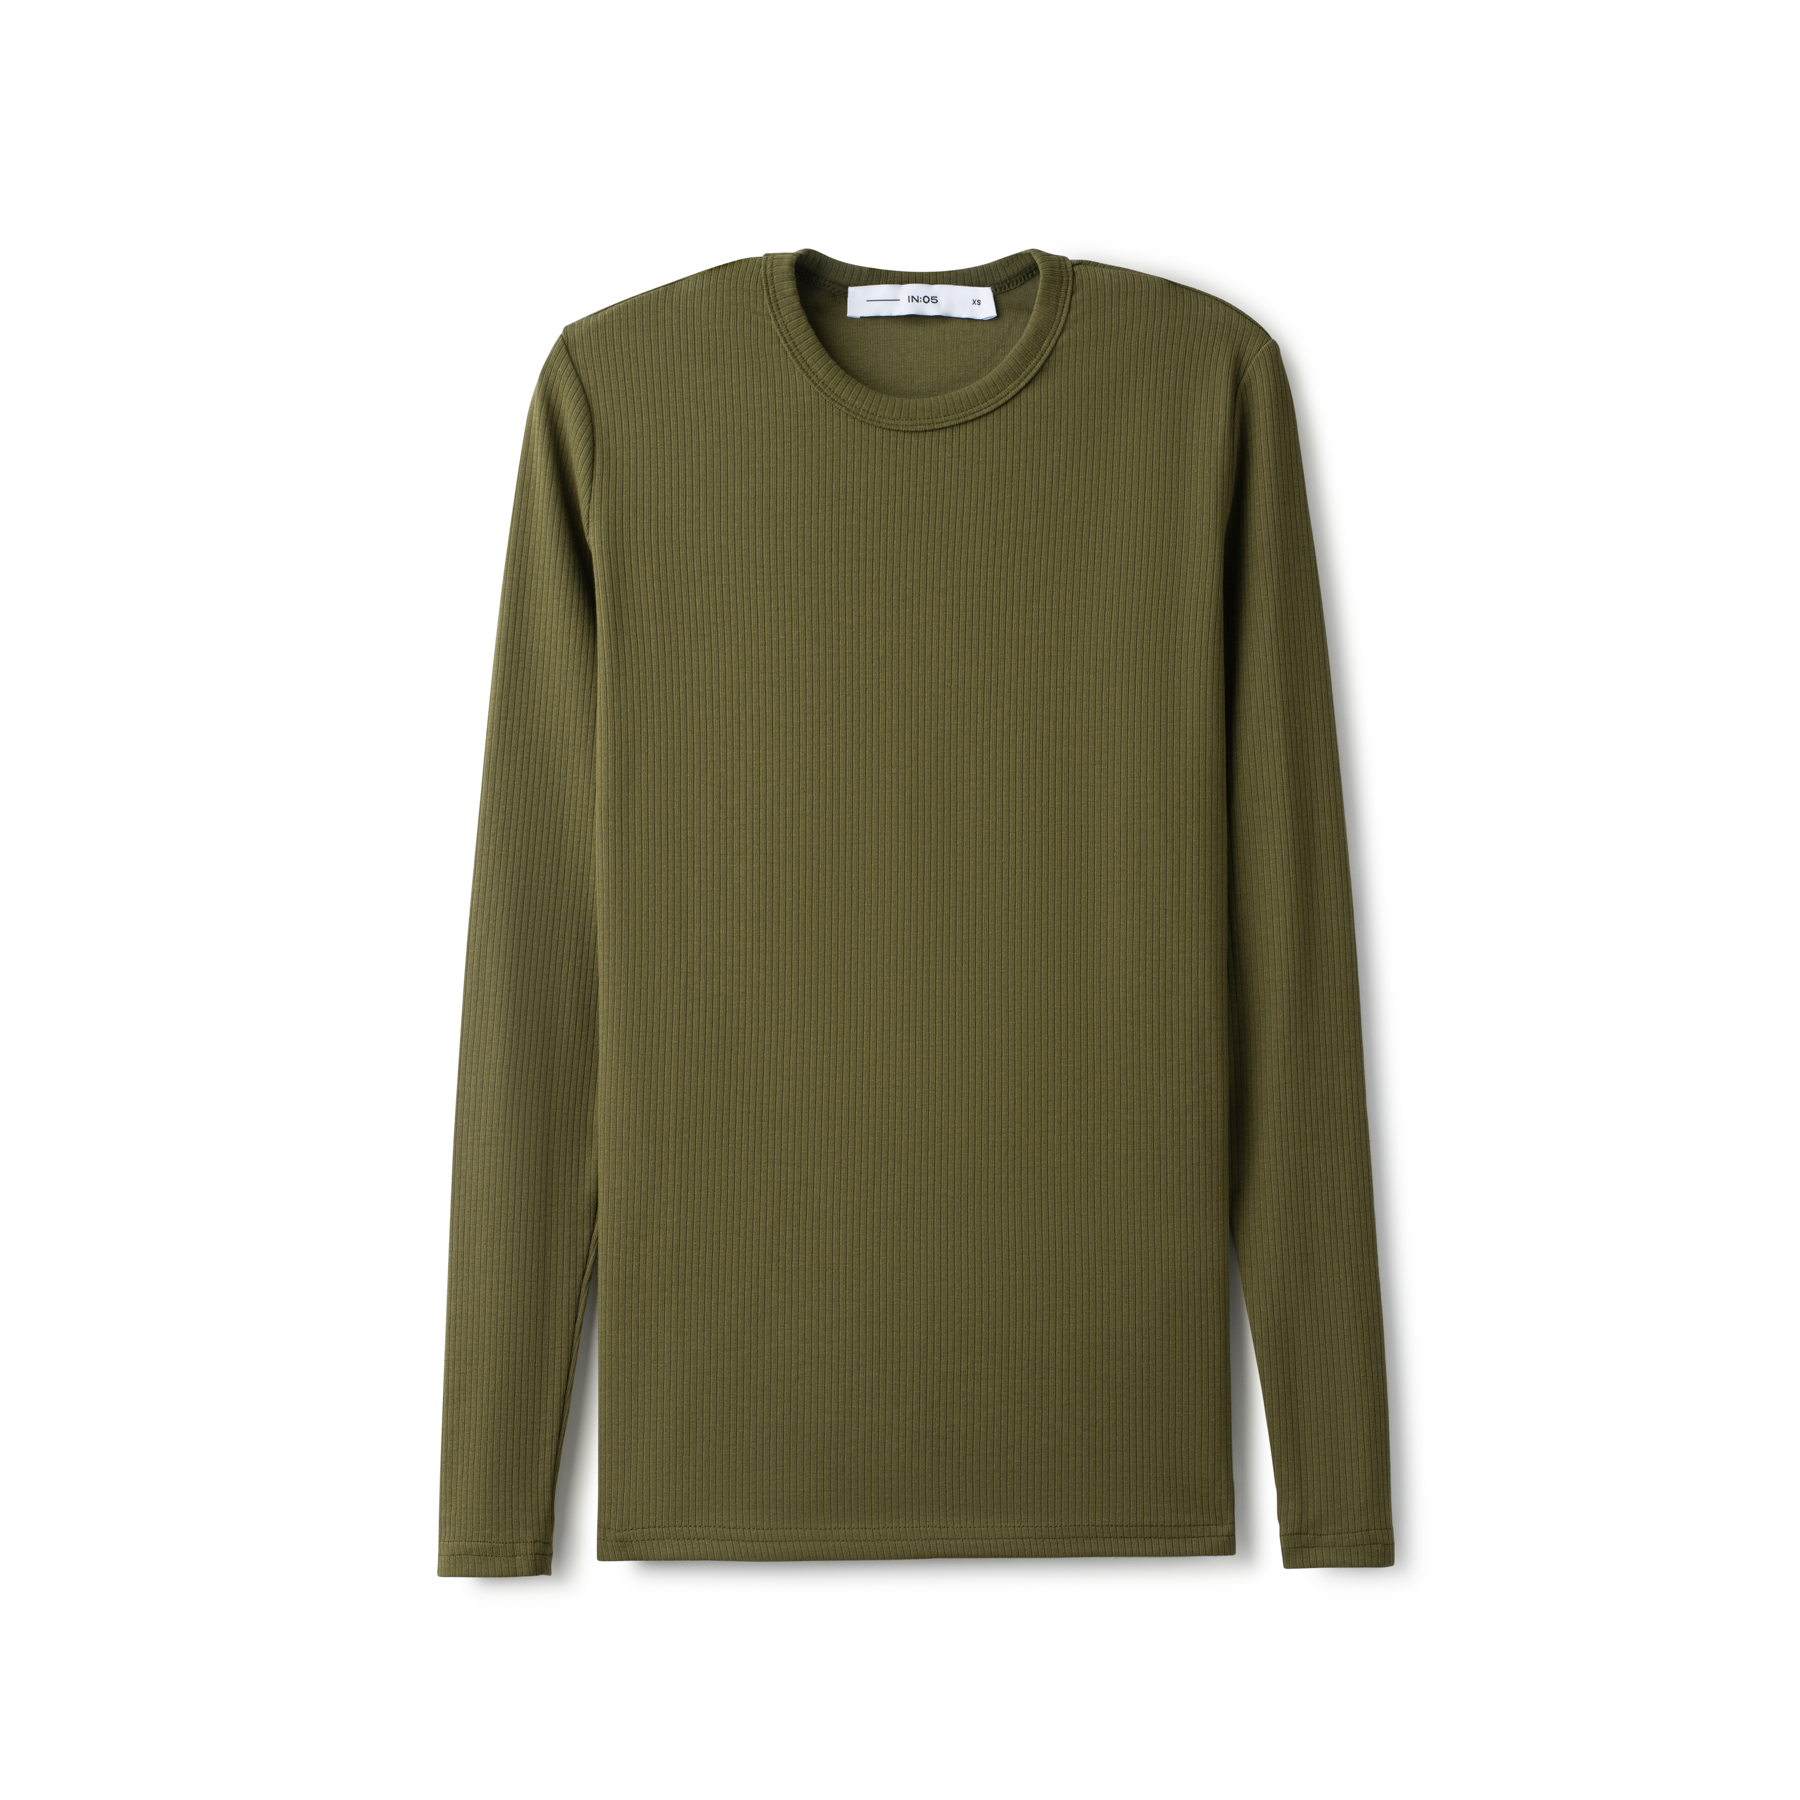 Signature Ribbed Tee IN: Olive